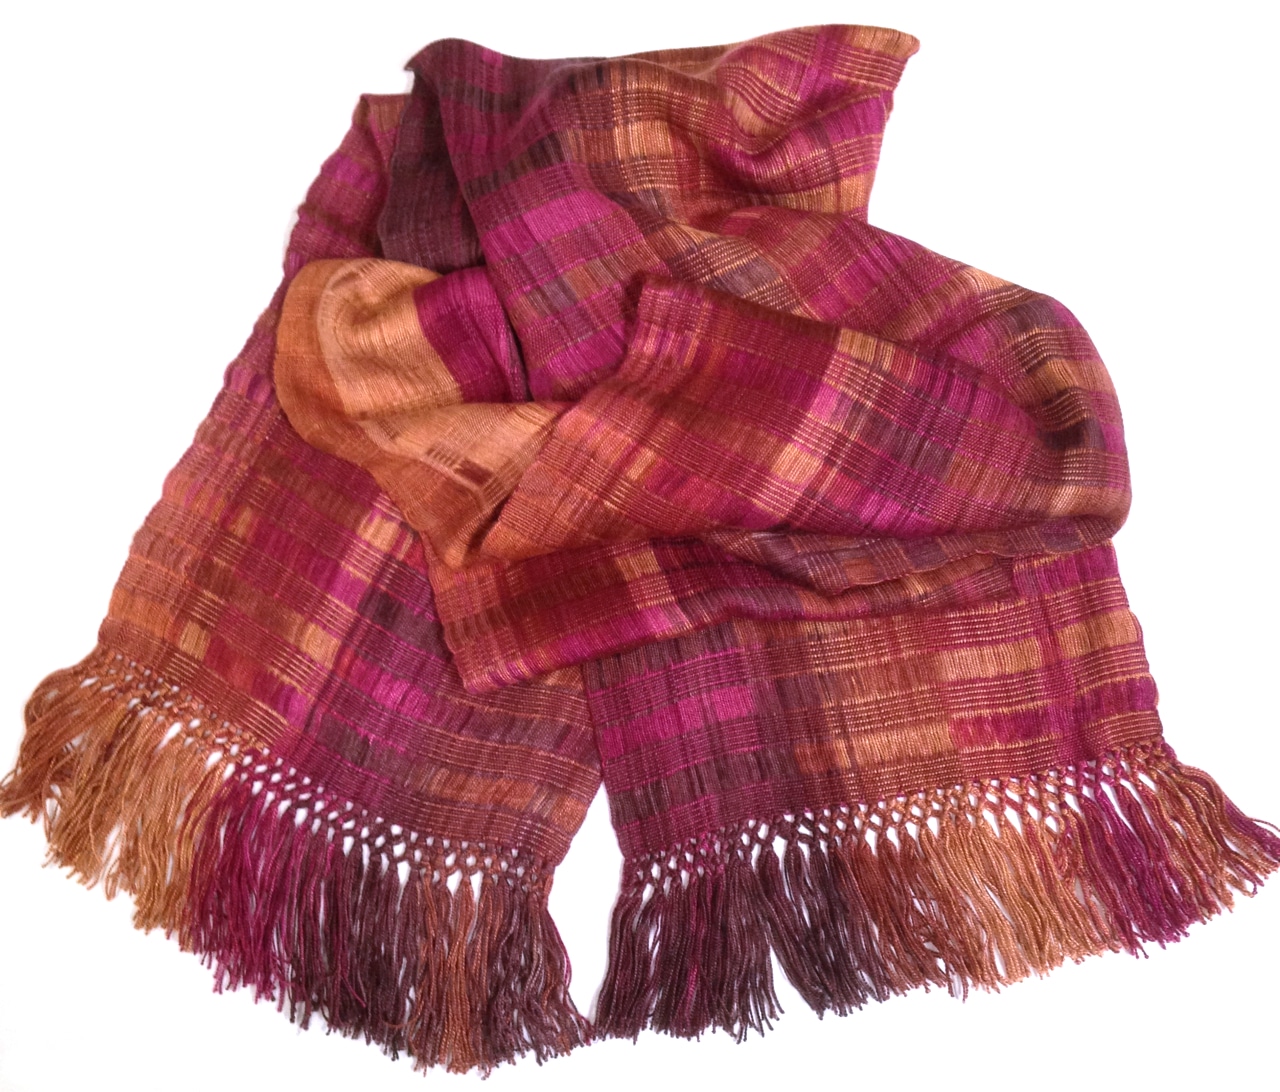 Raspberry and Apricot Lightweight Bamboo Open-Weave Handwoven Scarf 8 x 68